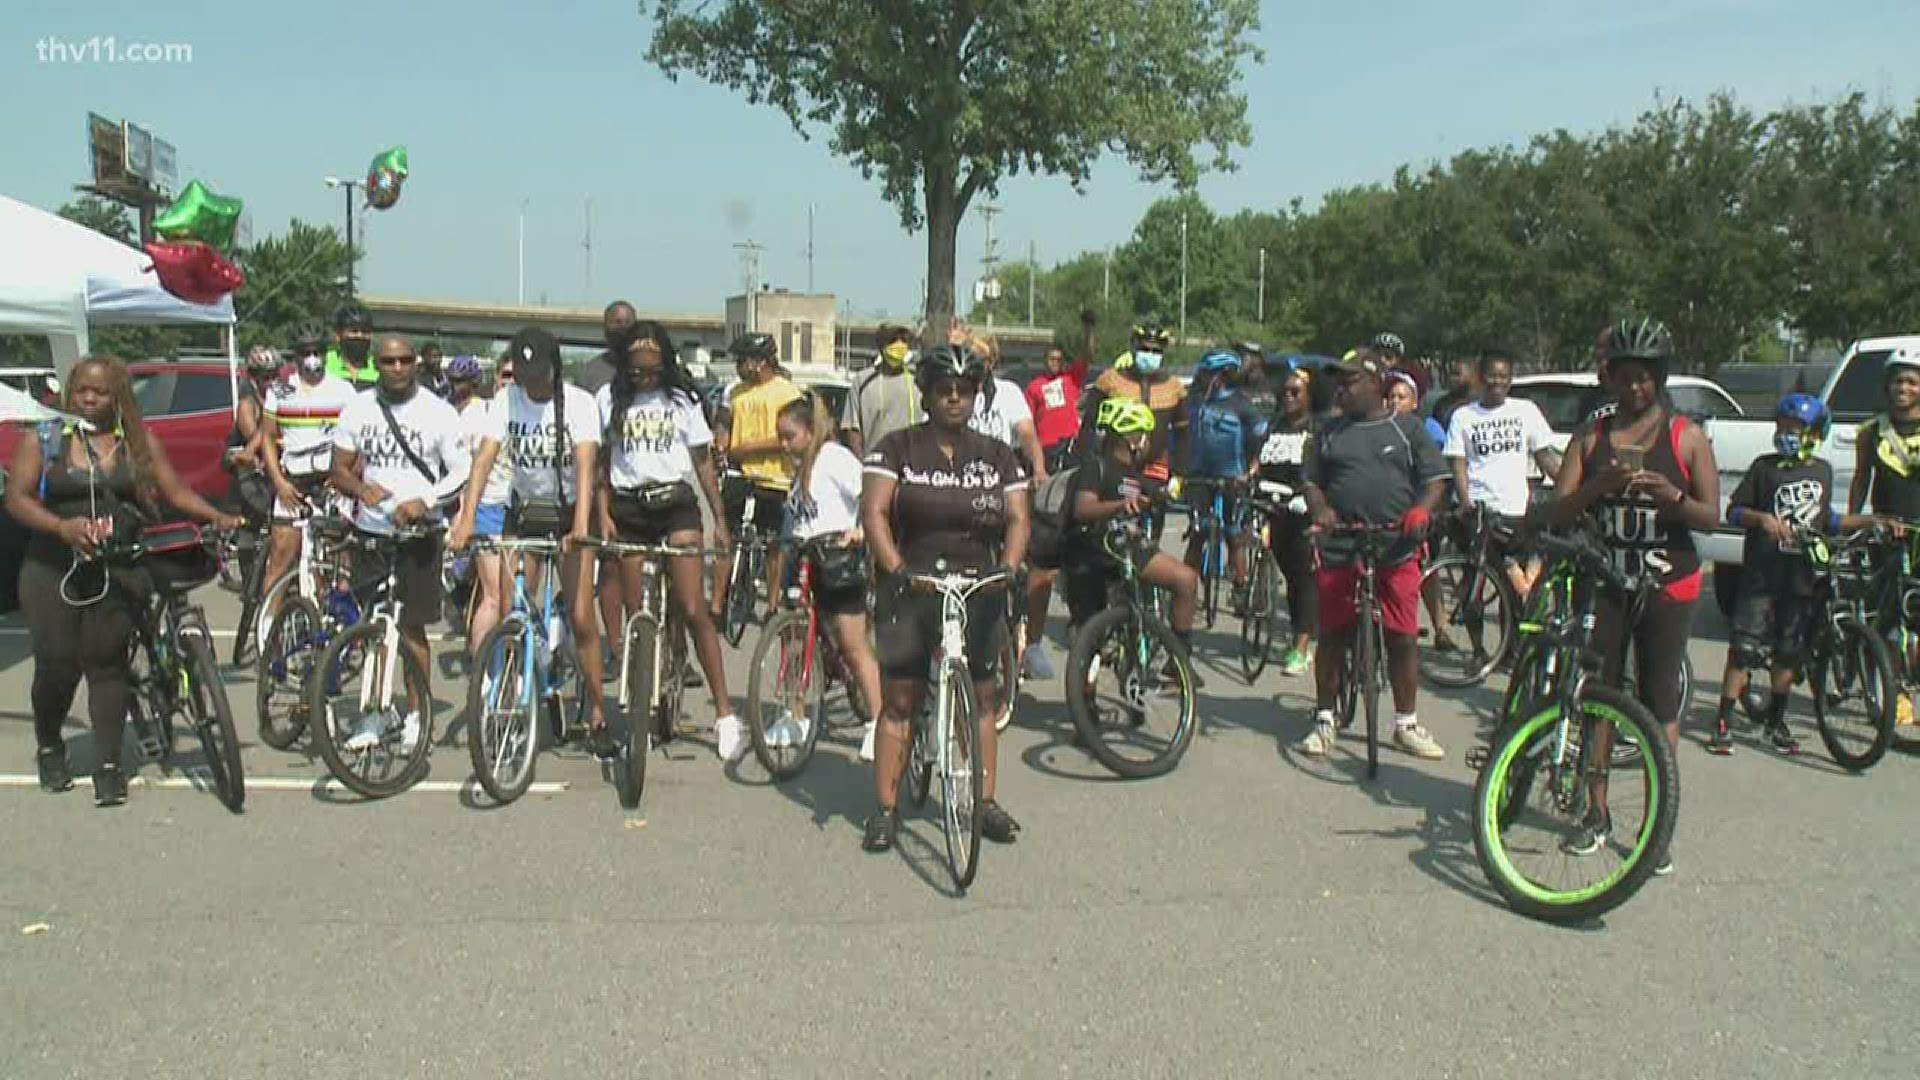 A 'Freedom Ride' honored Juneteenth earlier today in North Little Rock.